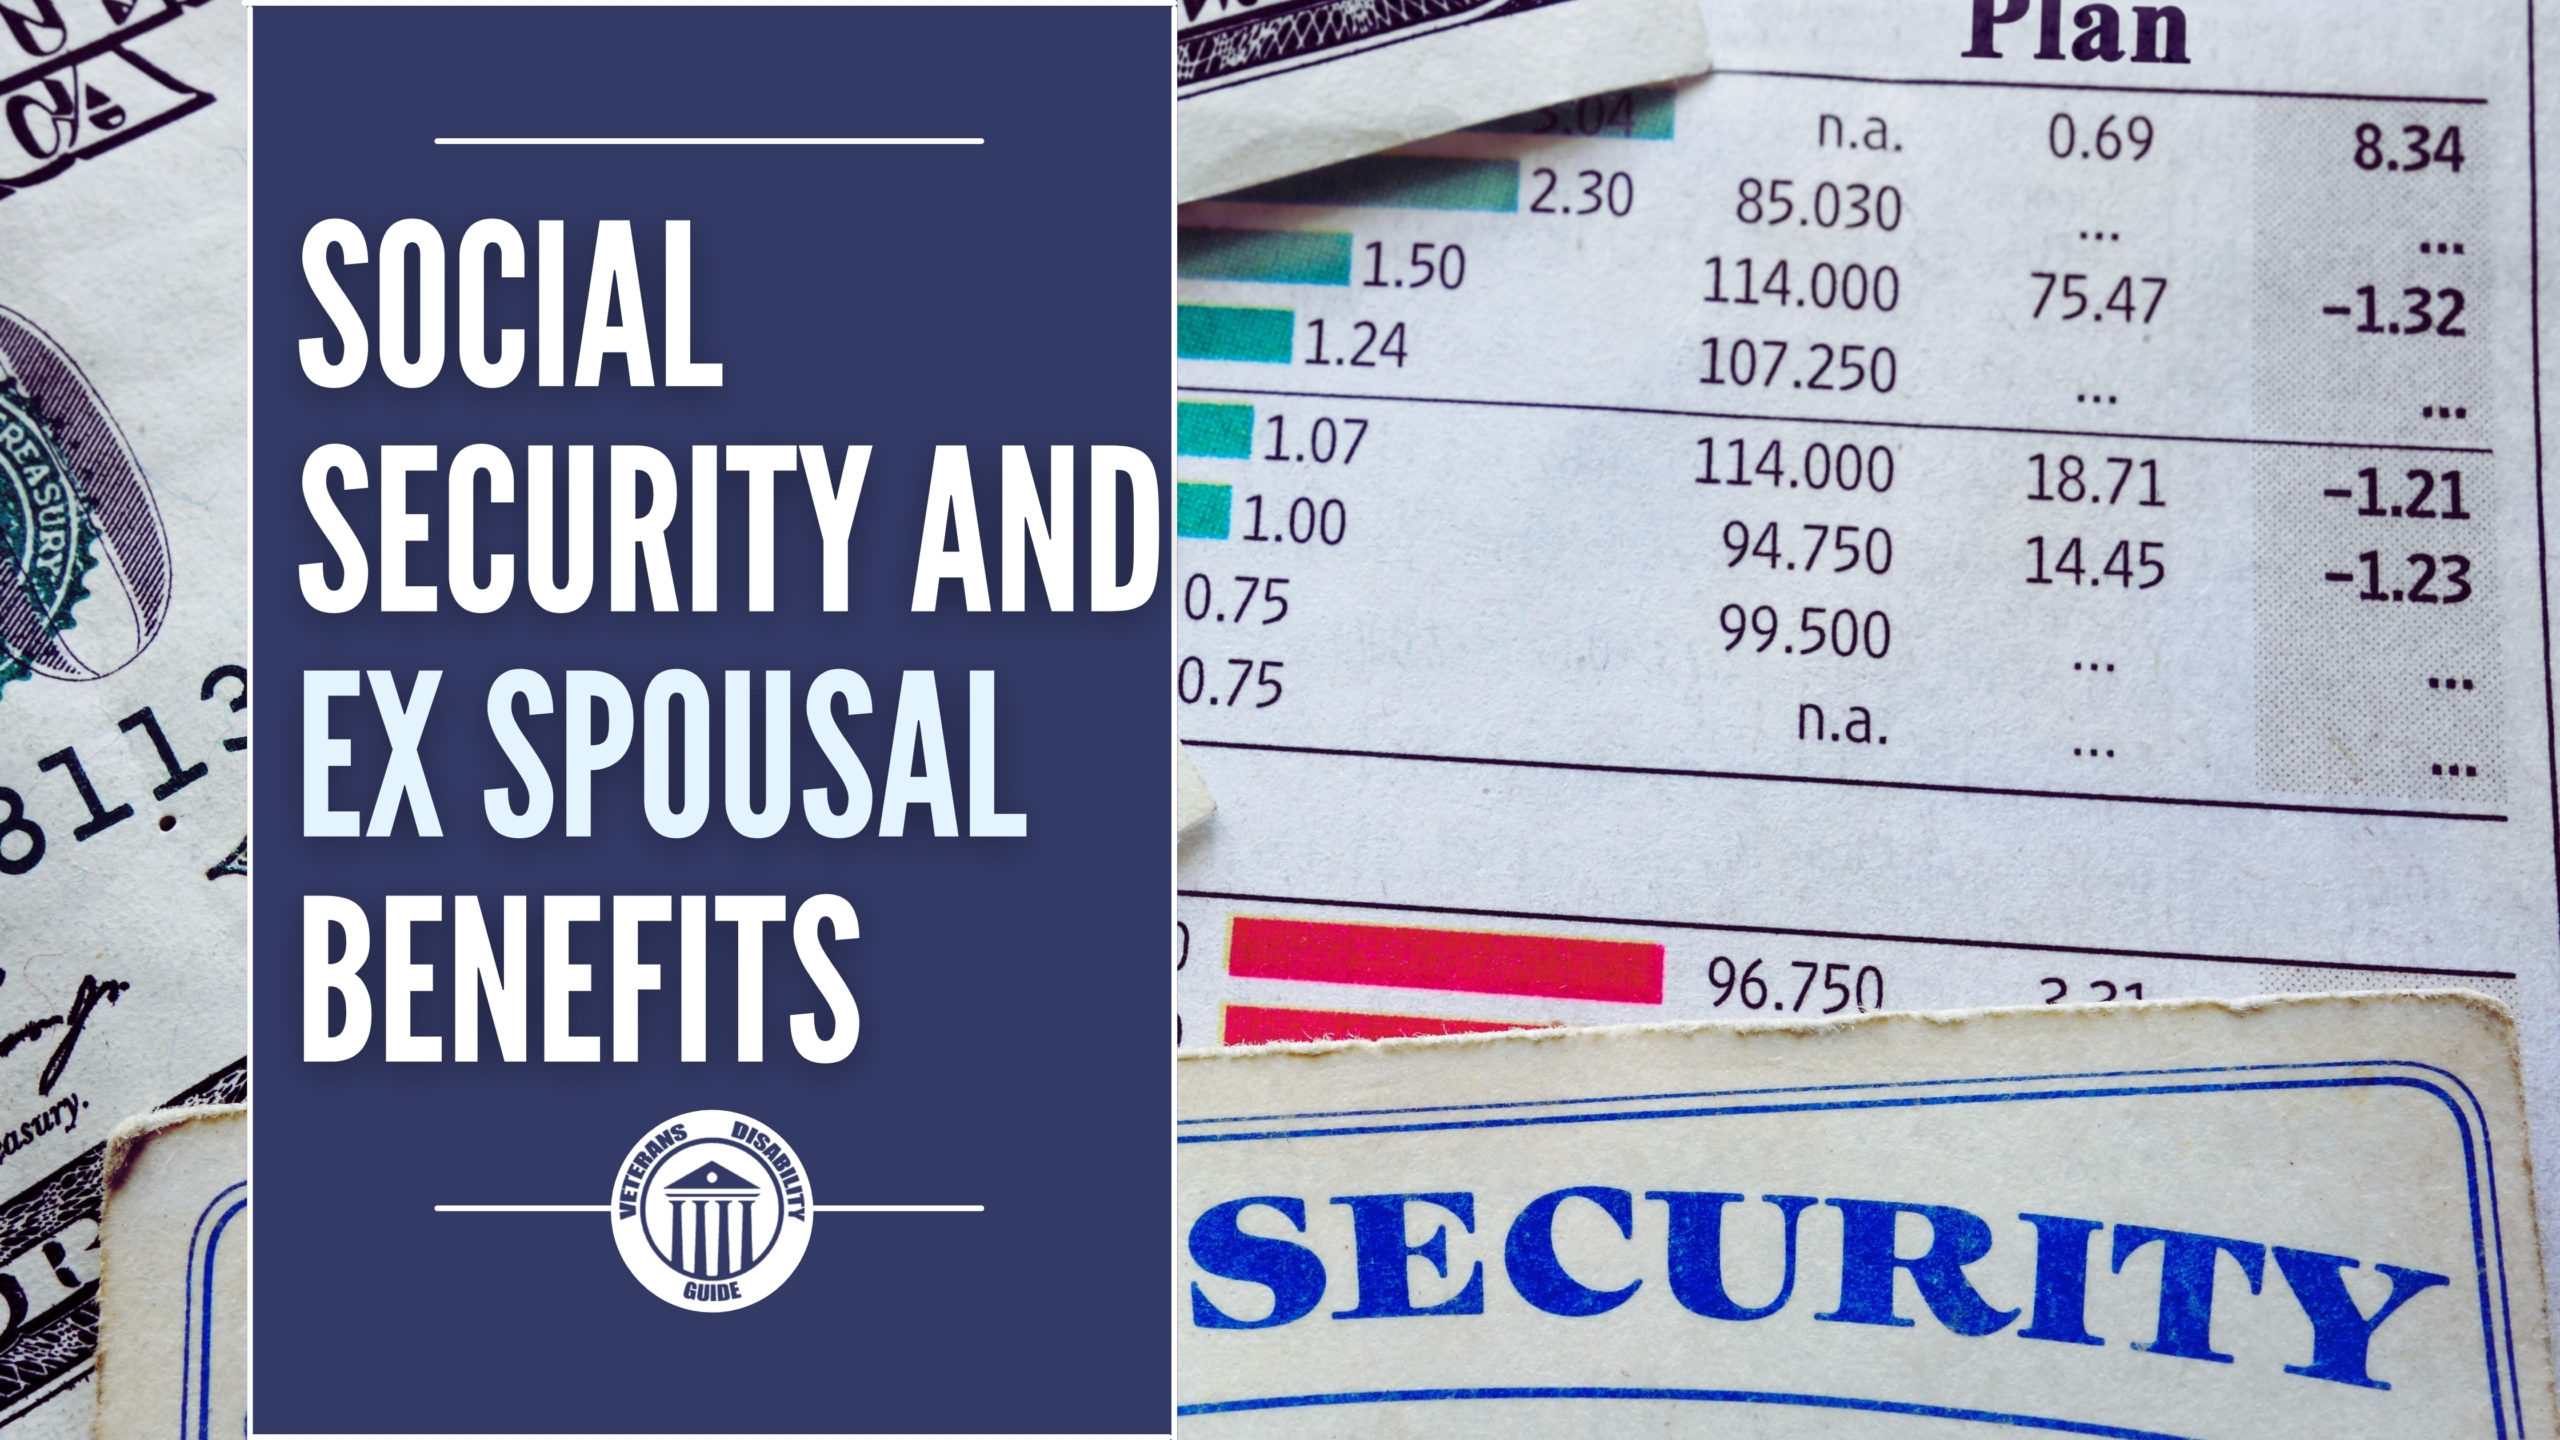 social security and ex spousal benefits blog header